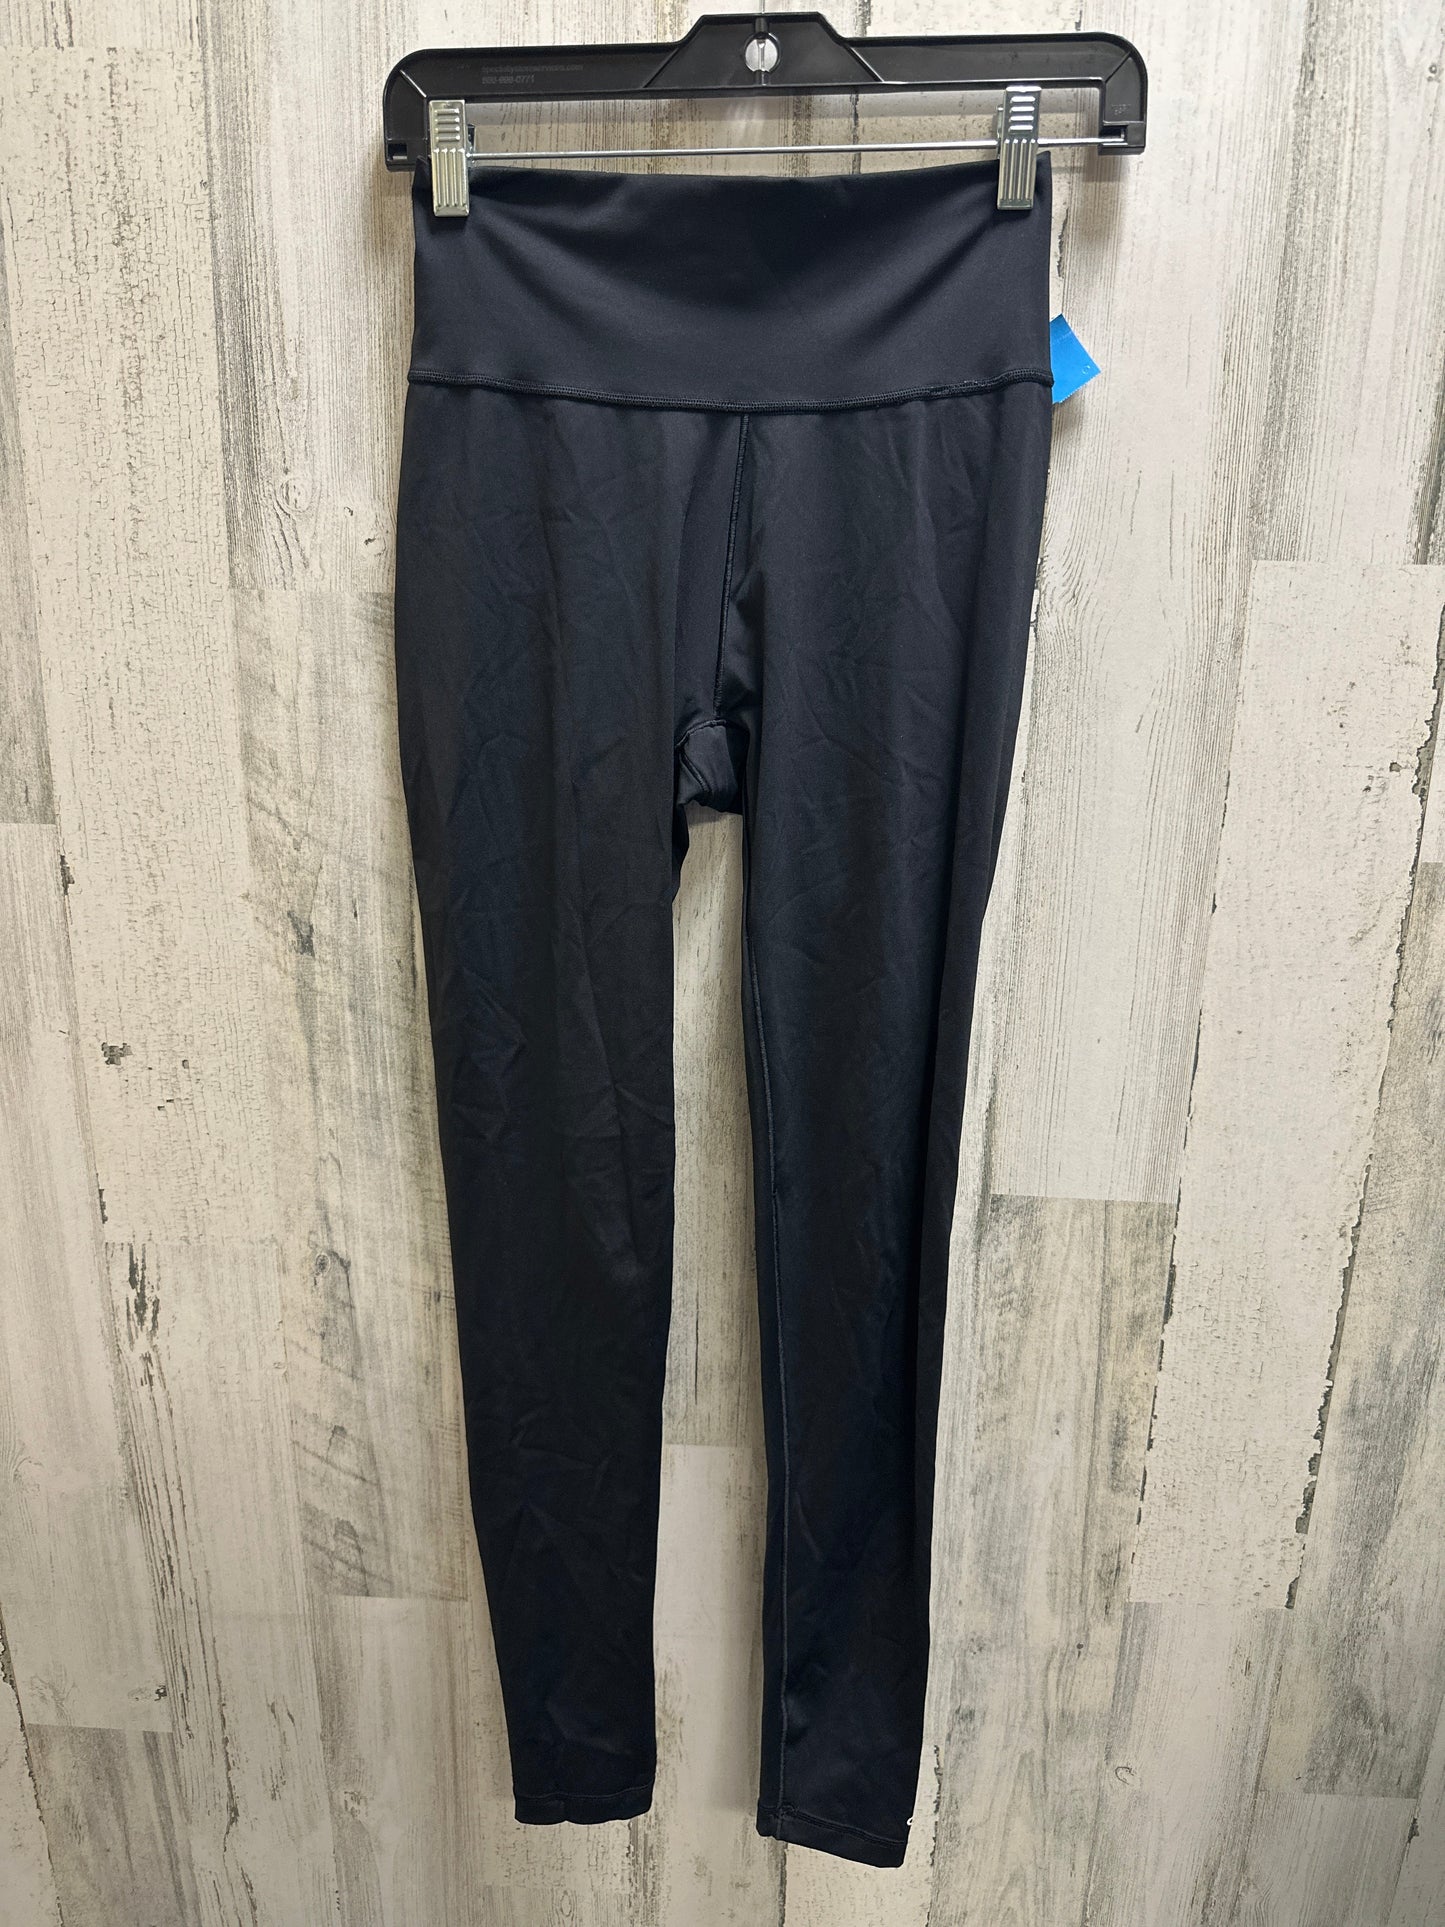 Athletic Leggings By Adidas  Size: S